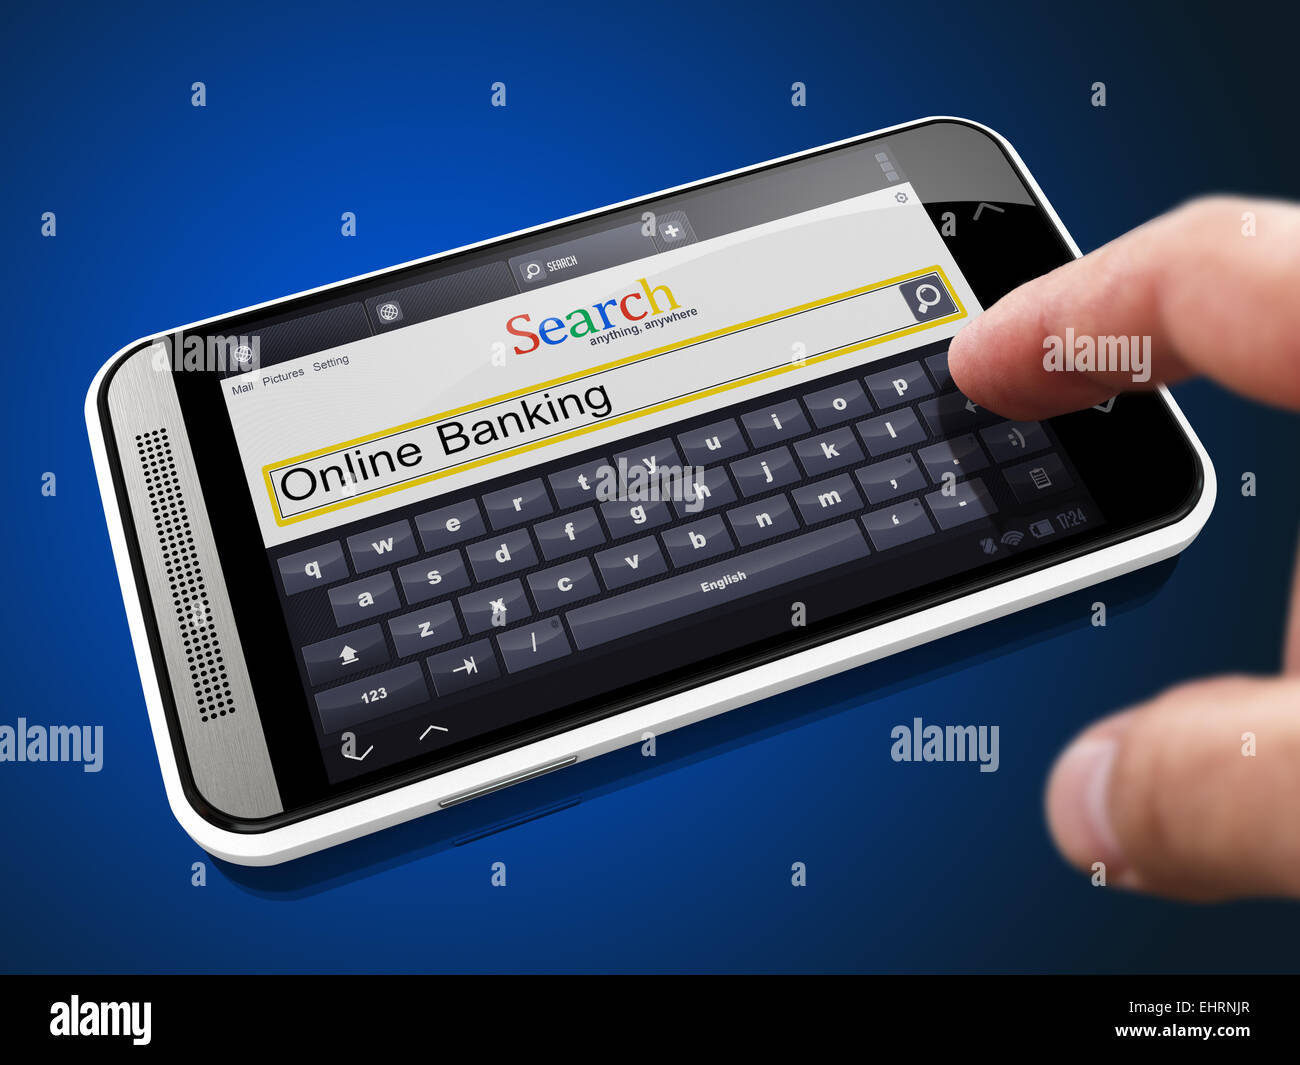 Online Banking on the Screen Touch Phone. Stock Photo